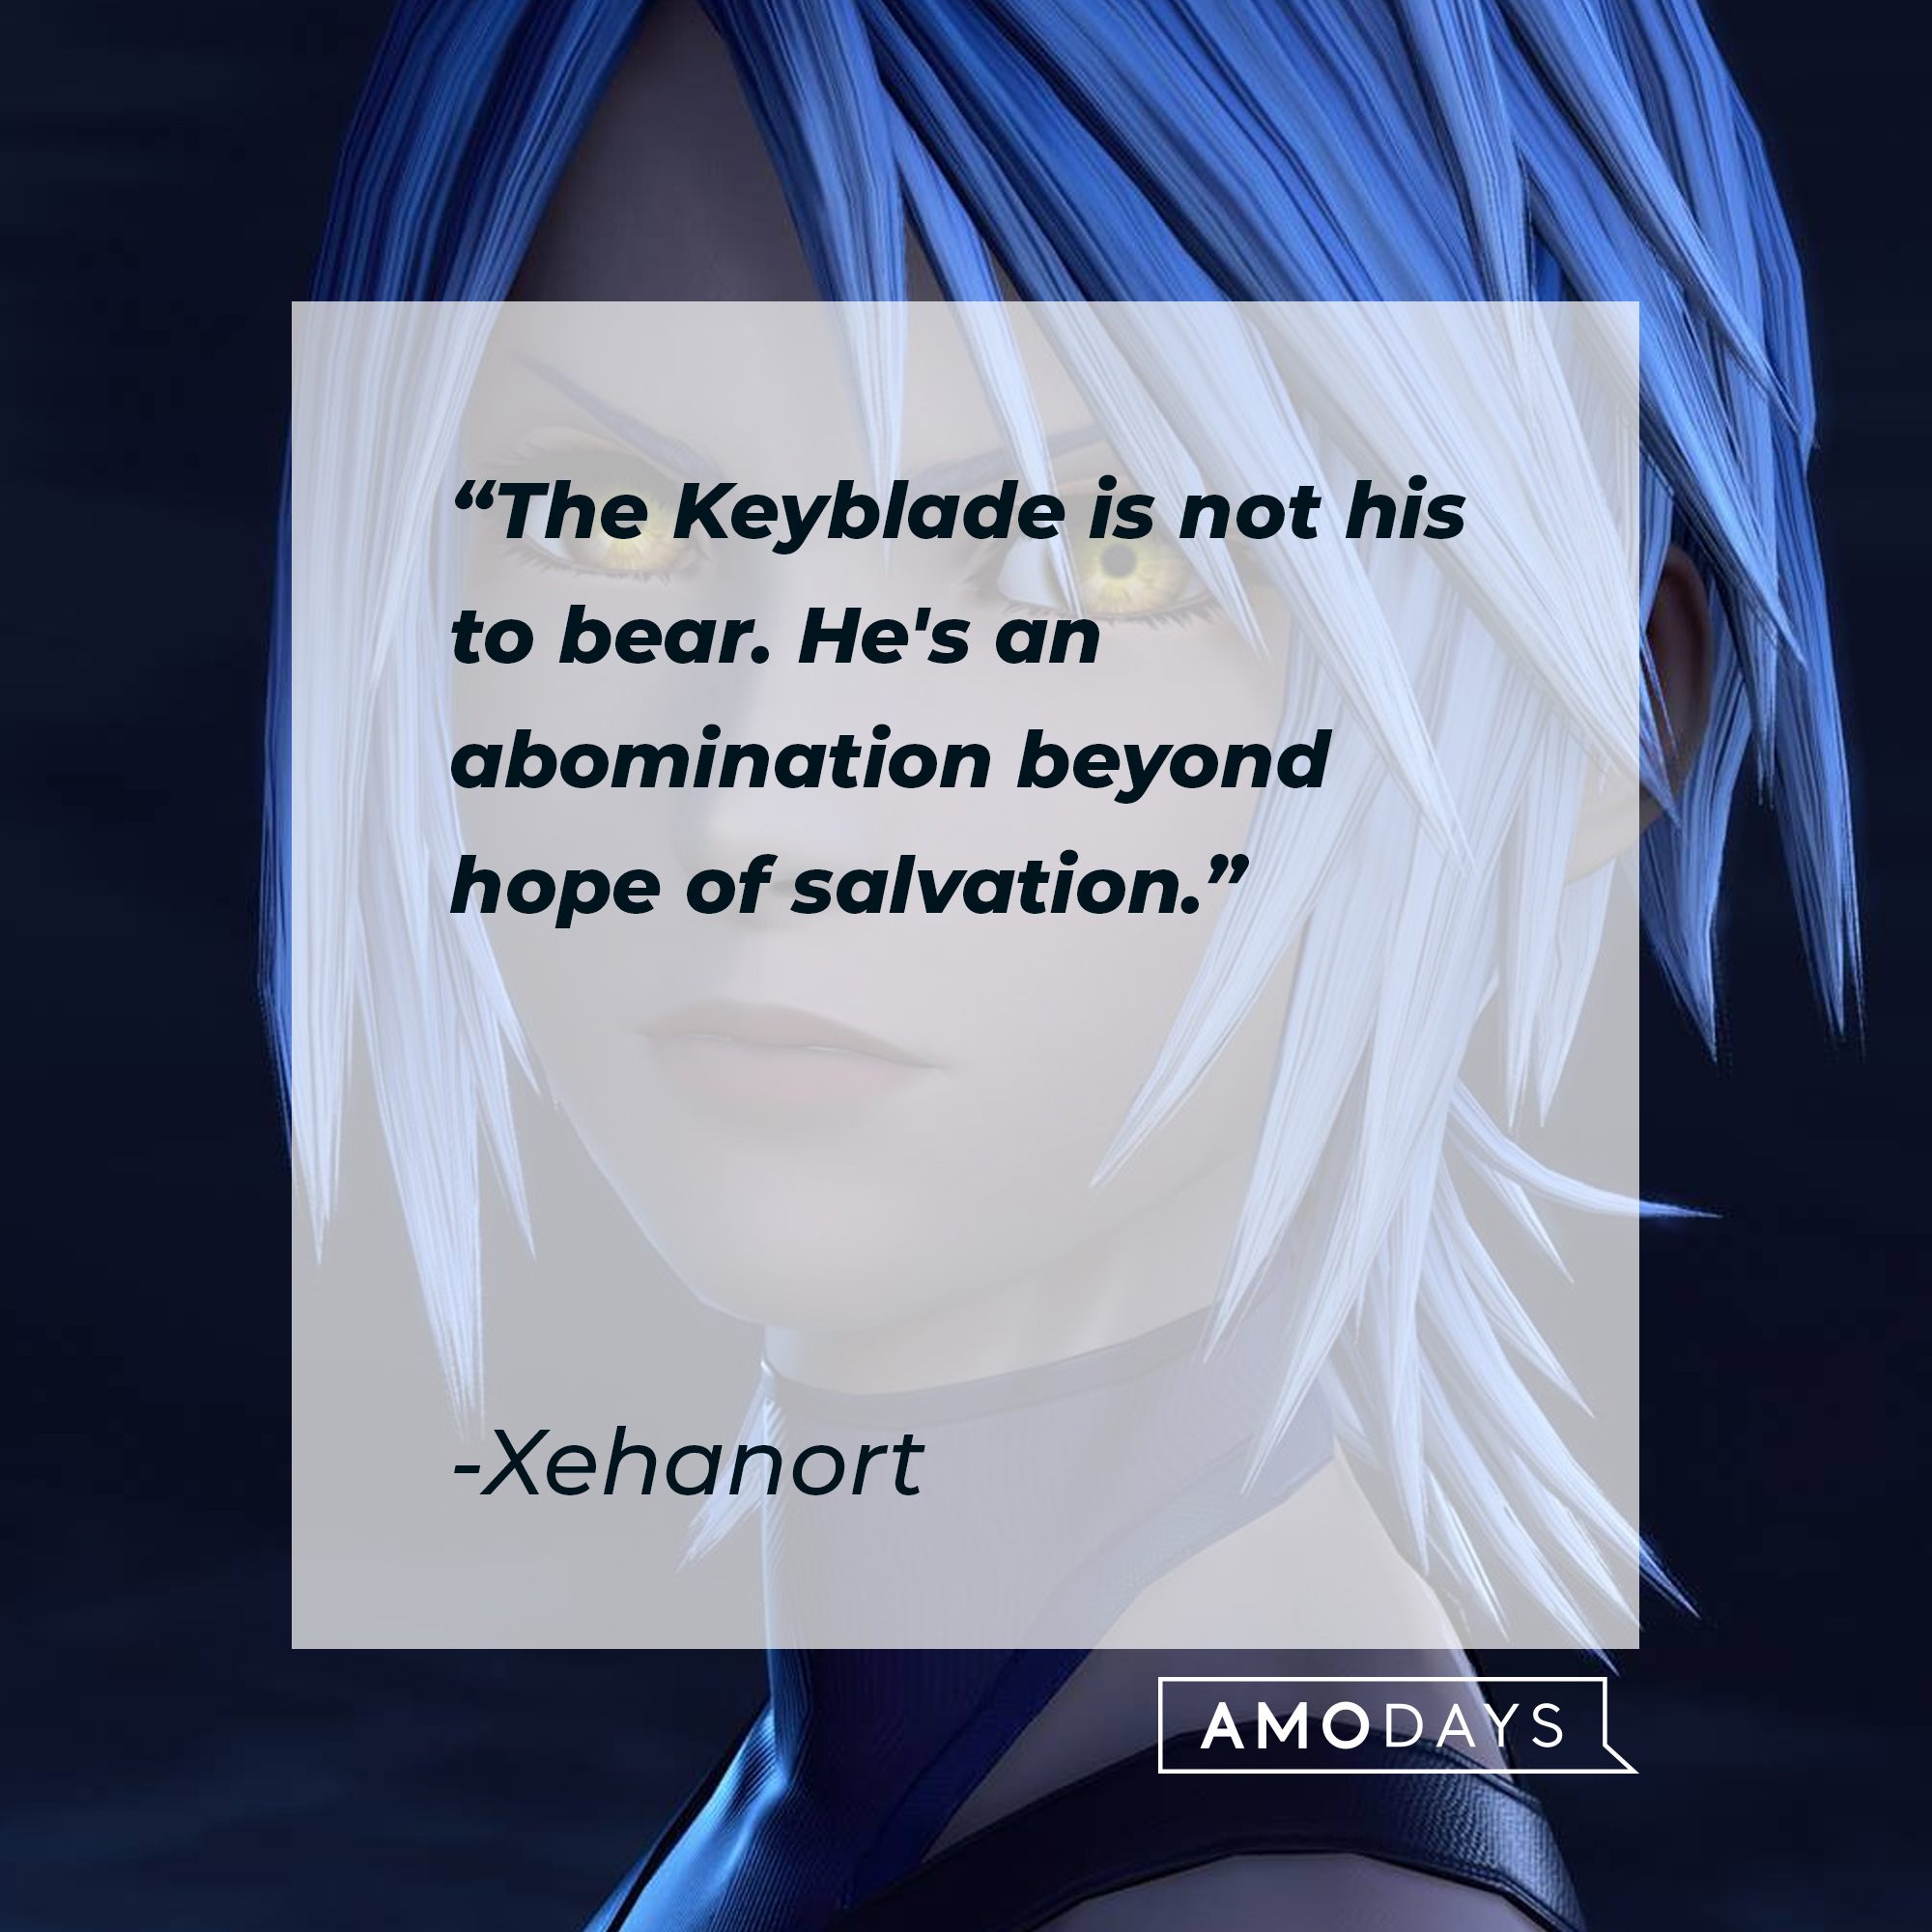 An image of Riki with Xehanort’s quote: “The Keyblade is not his to bear. He's an abomination beyond hope of salvation.” | Source: facebook.com/KingdomHearts